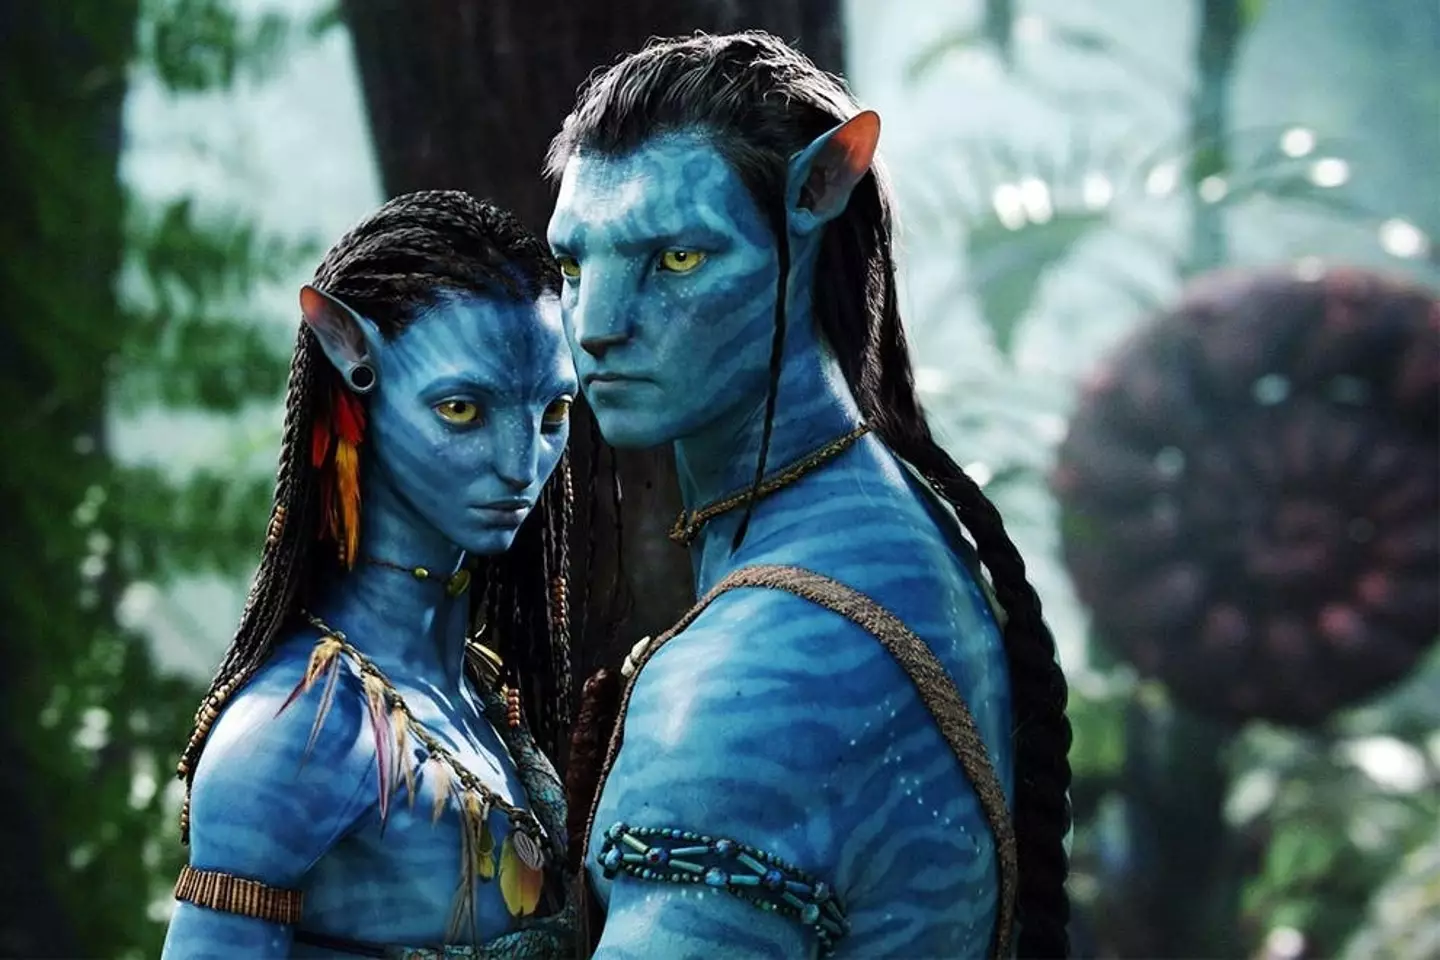 The costume was inspired by the Avatar film.